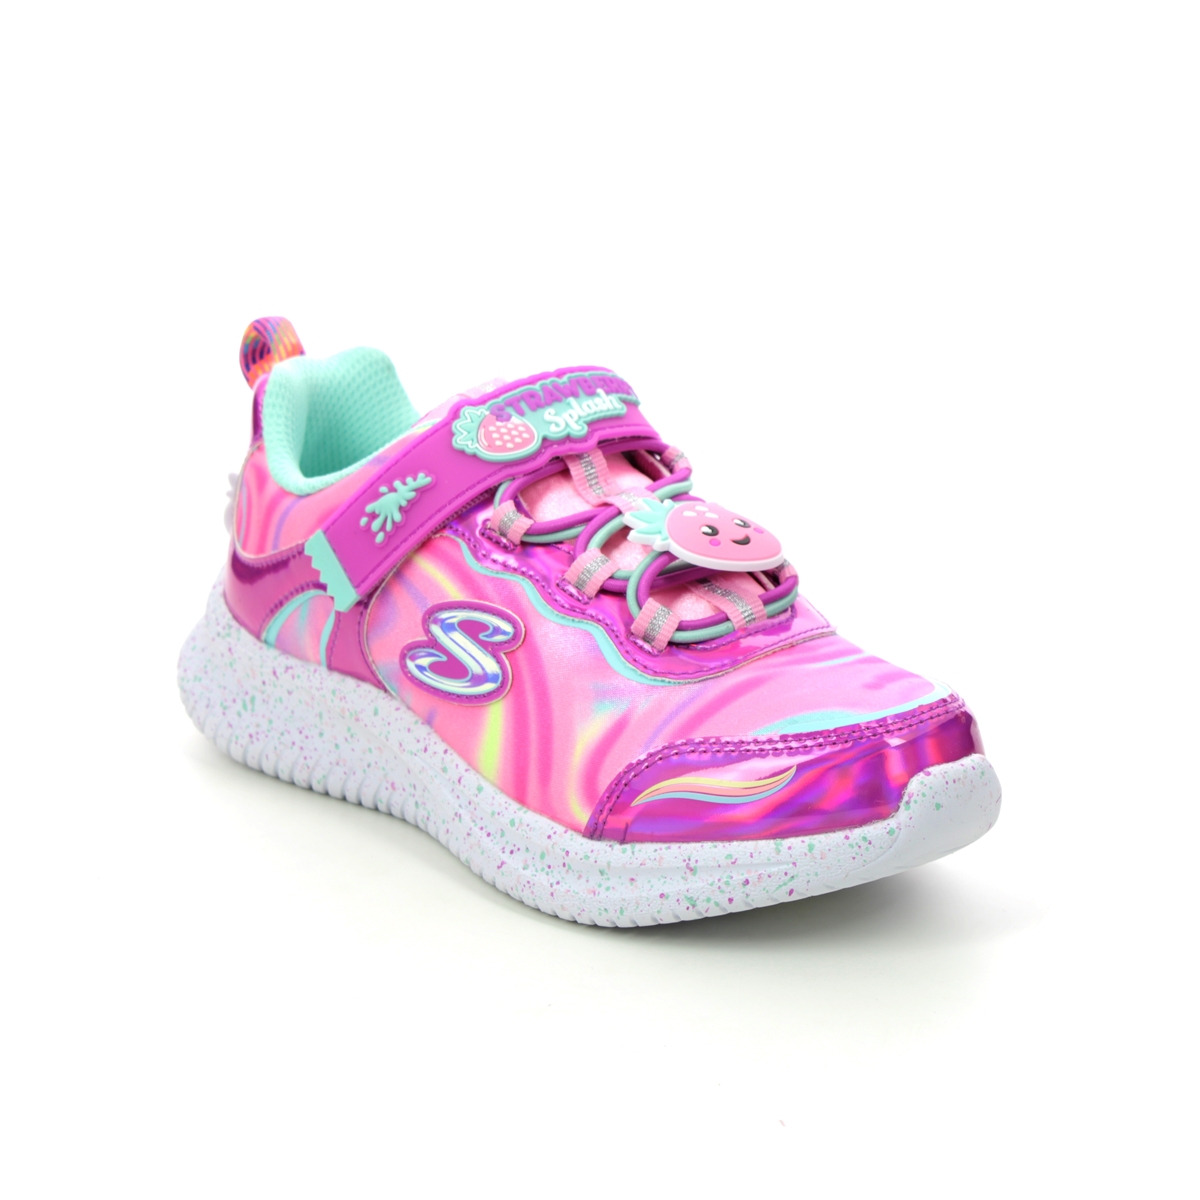 Skechers Jumpsters Sweet Pink Kids Girls Trainers 302215L In Size 29 In Plain Pink For kids